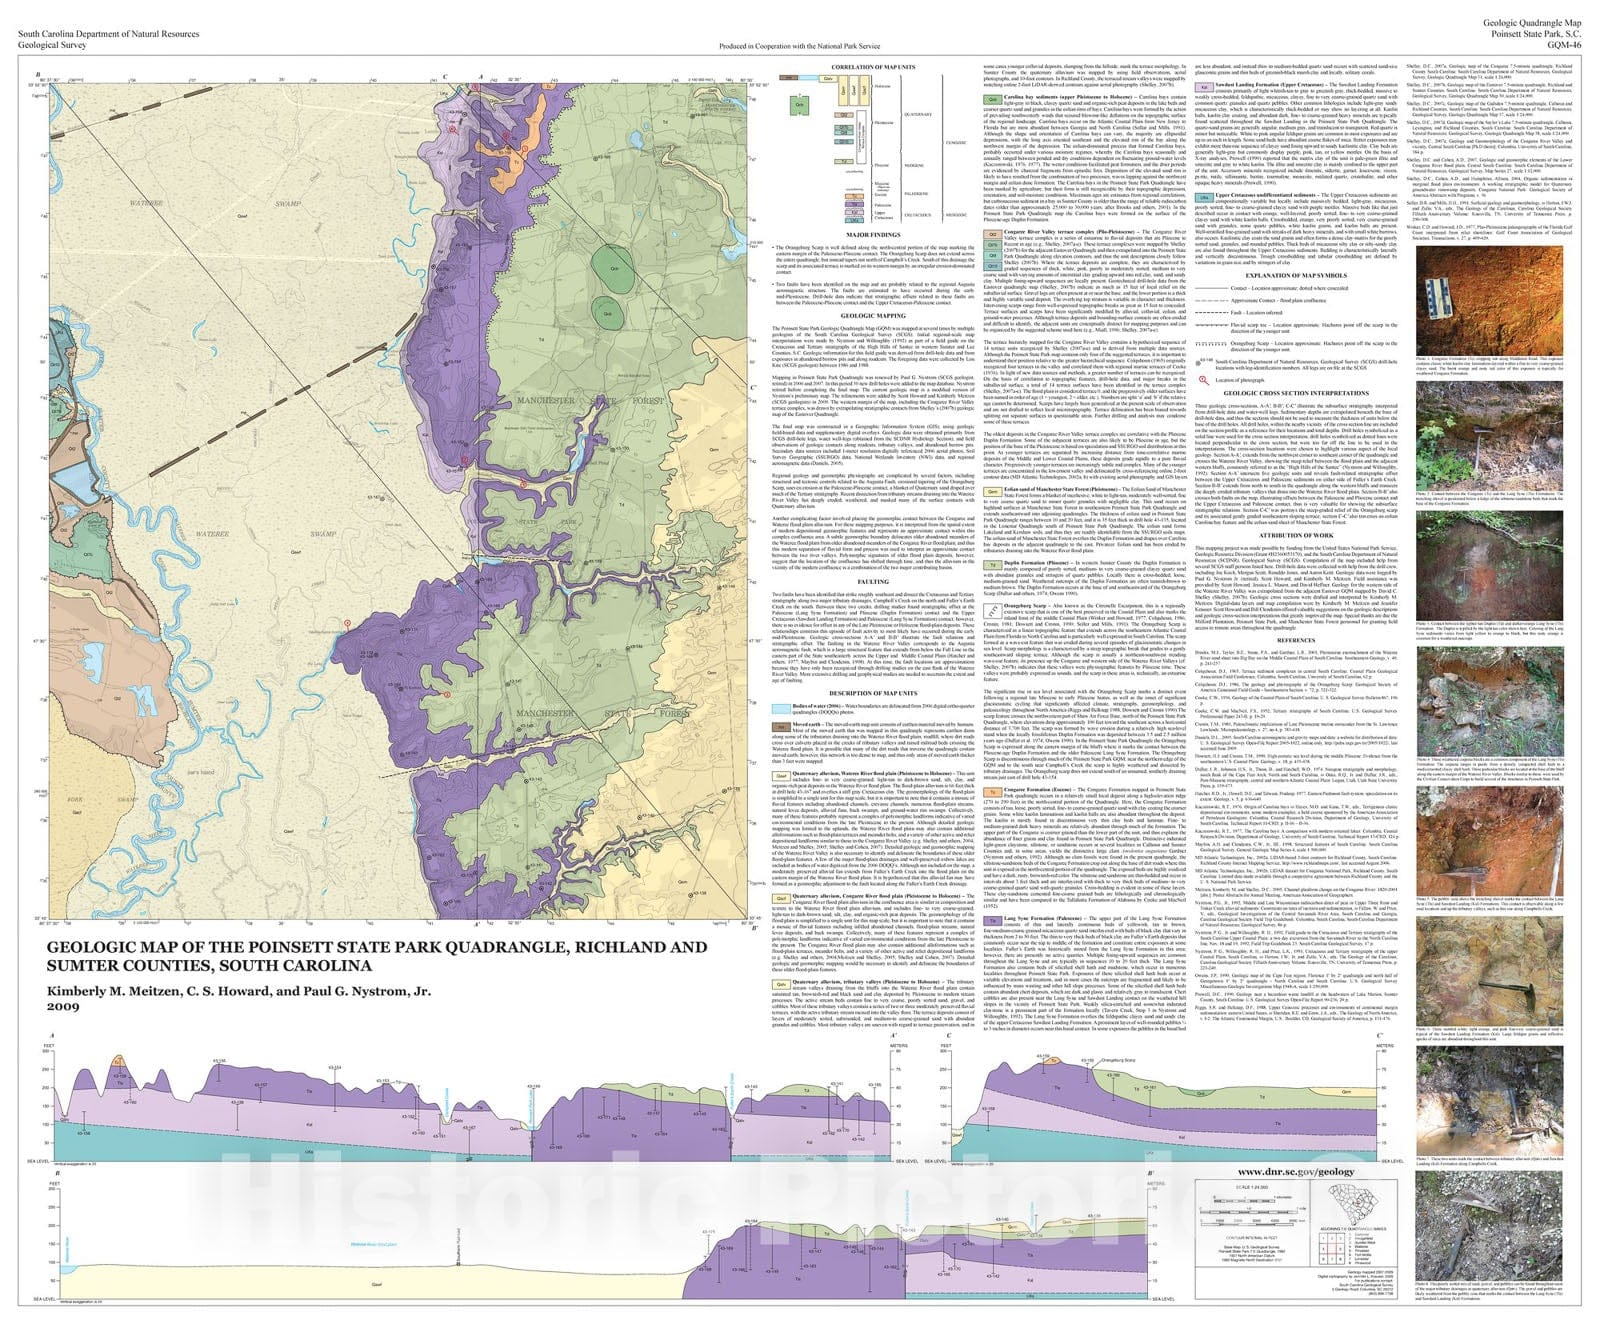 Map : Geologic map of the Poinsett State Park quadrangle, Richland and Sumter counties, South Carolina, 2009 Cartography Wall Art :